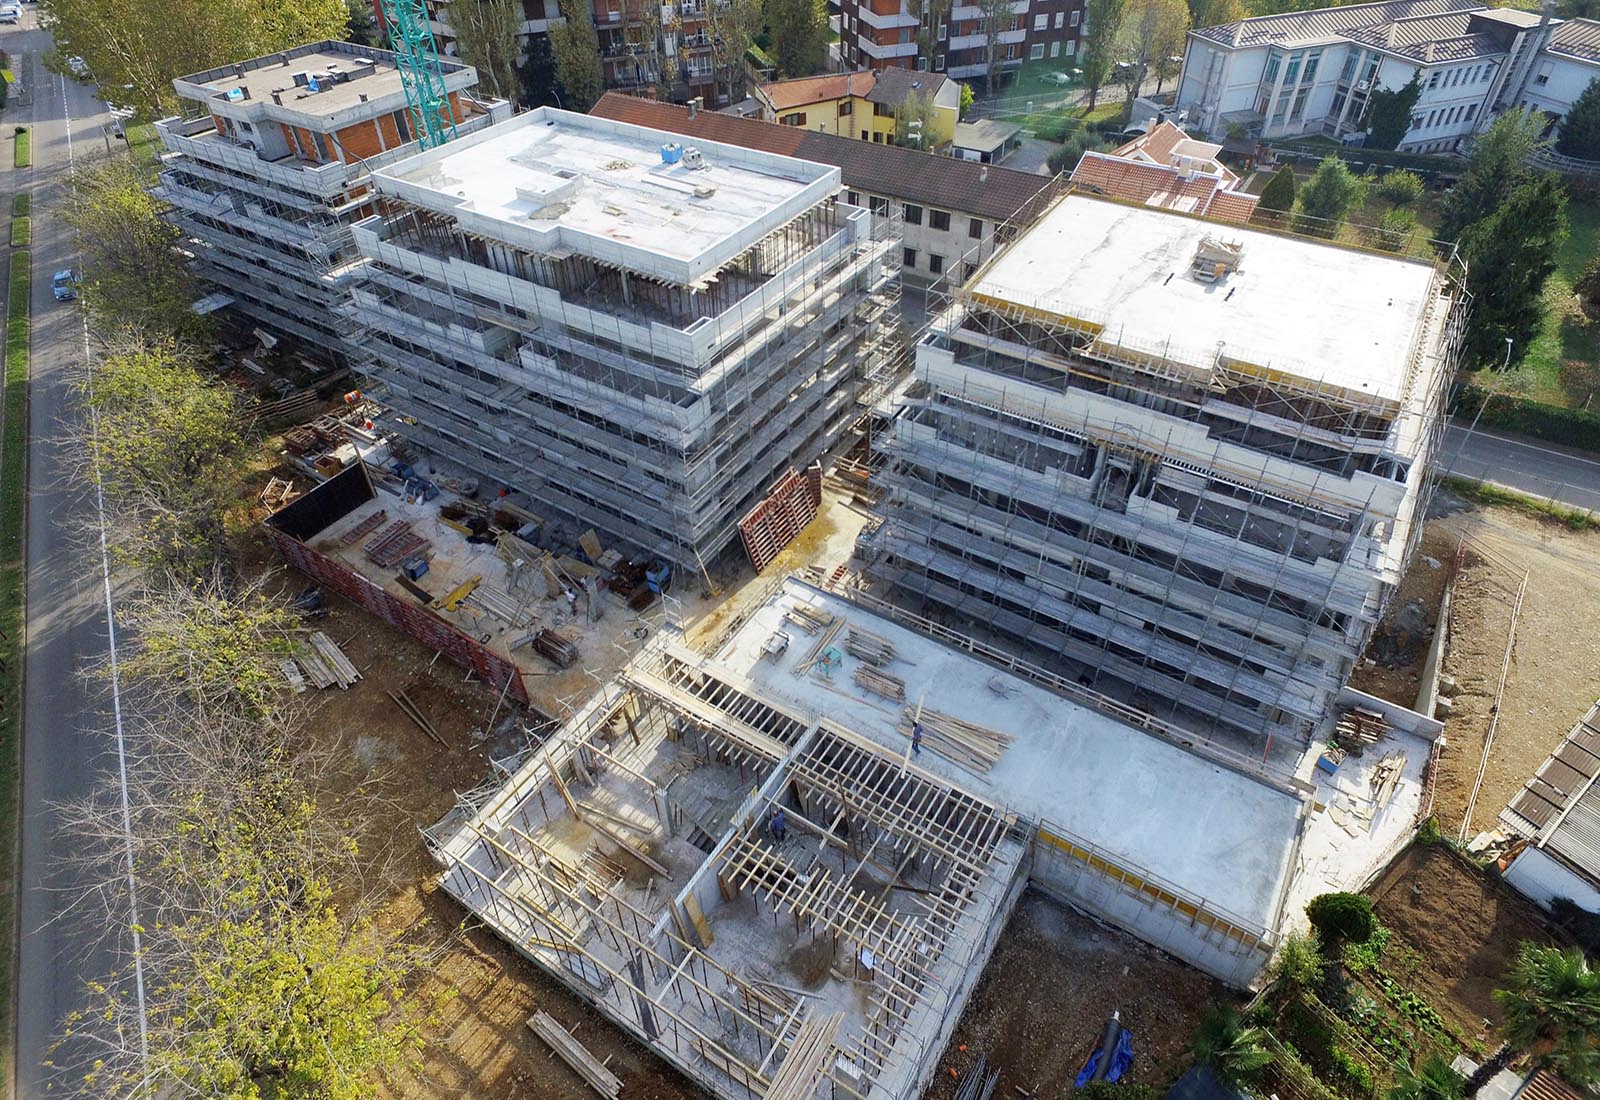 Residential buildings in Biringhello street in Rho - Aerial view of the construction site